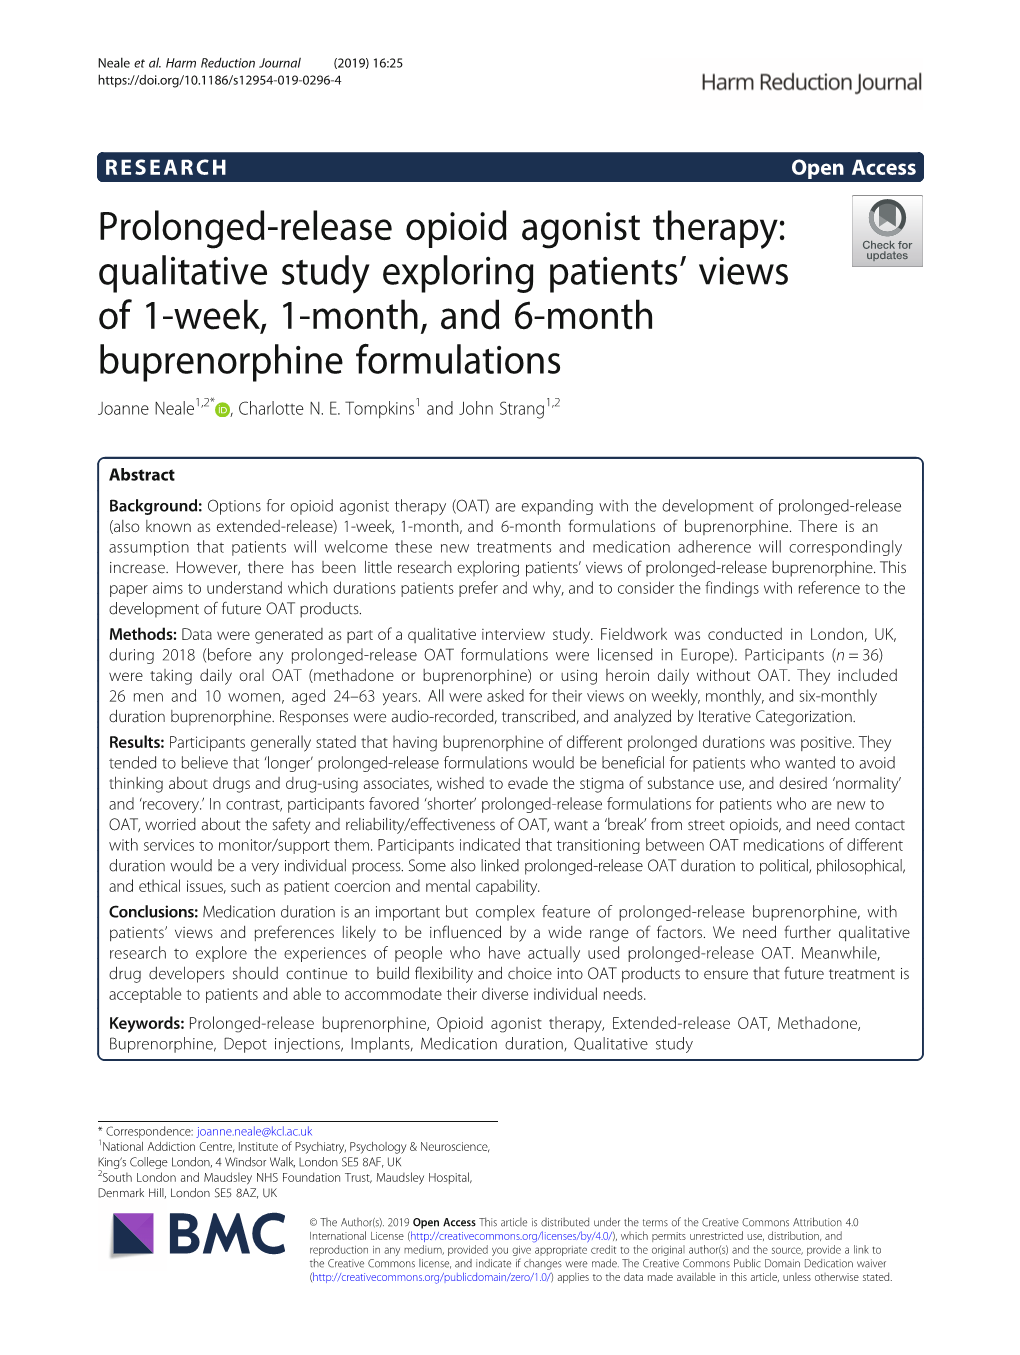 Prolonged-Release Opioid Agonist Therapy